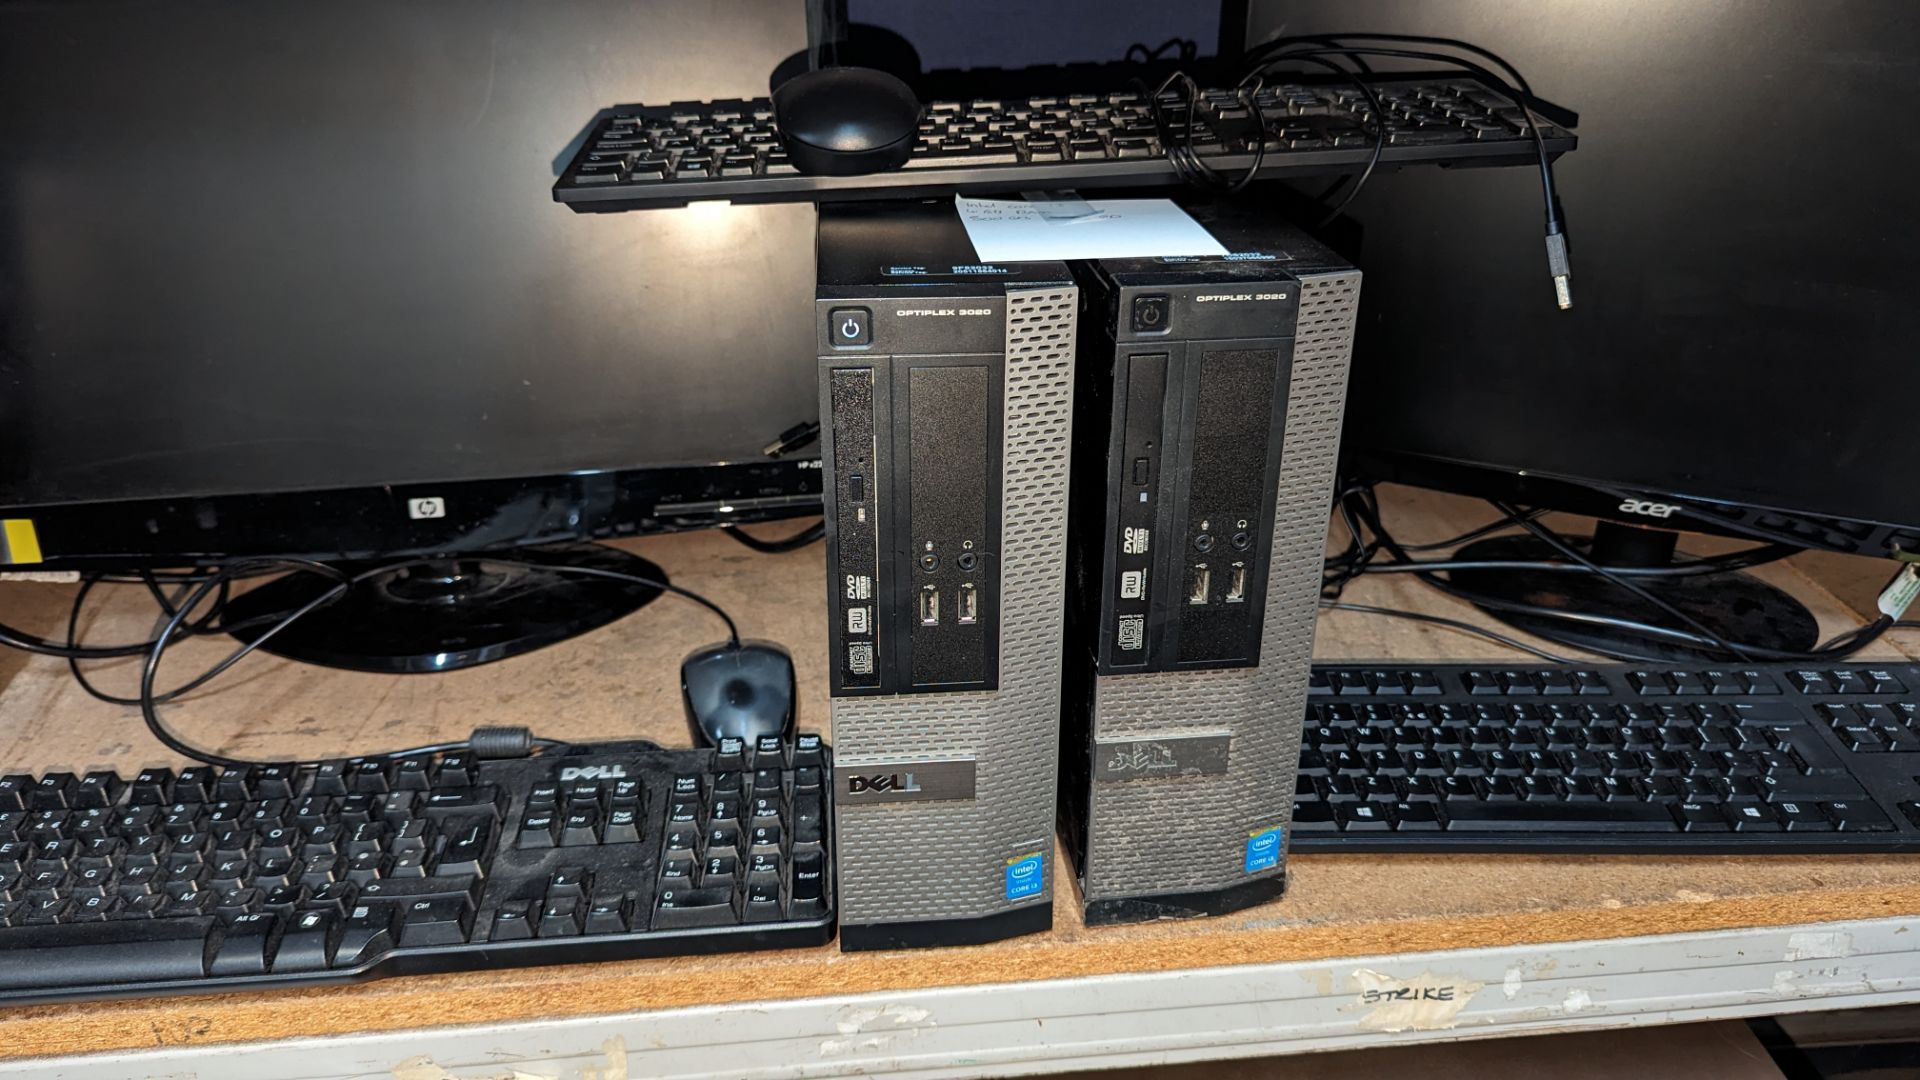 3 off Dell OptiPlex 3020 compact computers each with Core i3 processor. Includes 2 keyboards, 2 mon - Image 4 of 7